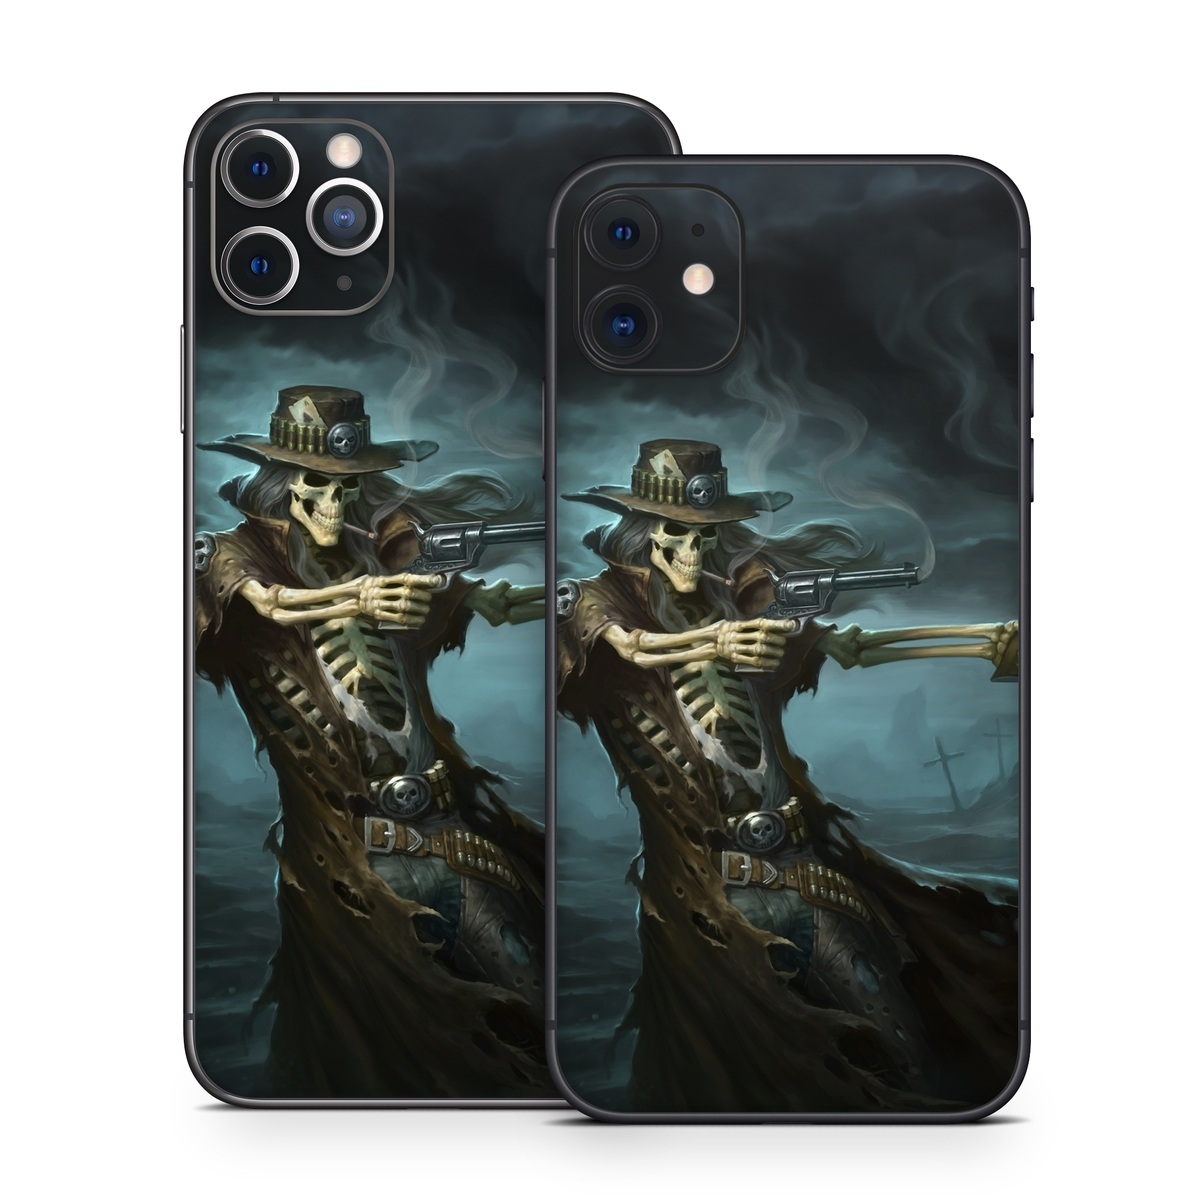 iPhone 11 Series Skin design of Cg artwork, Action-adventure game, Darkness, Illustration, Games, Adventure game, Pc game, Woman warrior, Digital compositing, Fictional character, with black, white, blue, gray colors